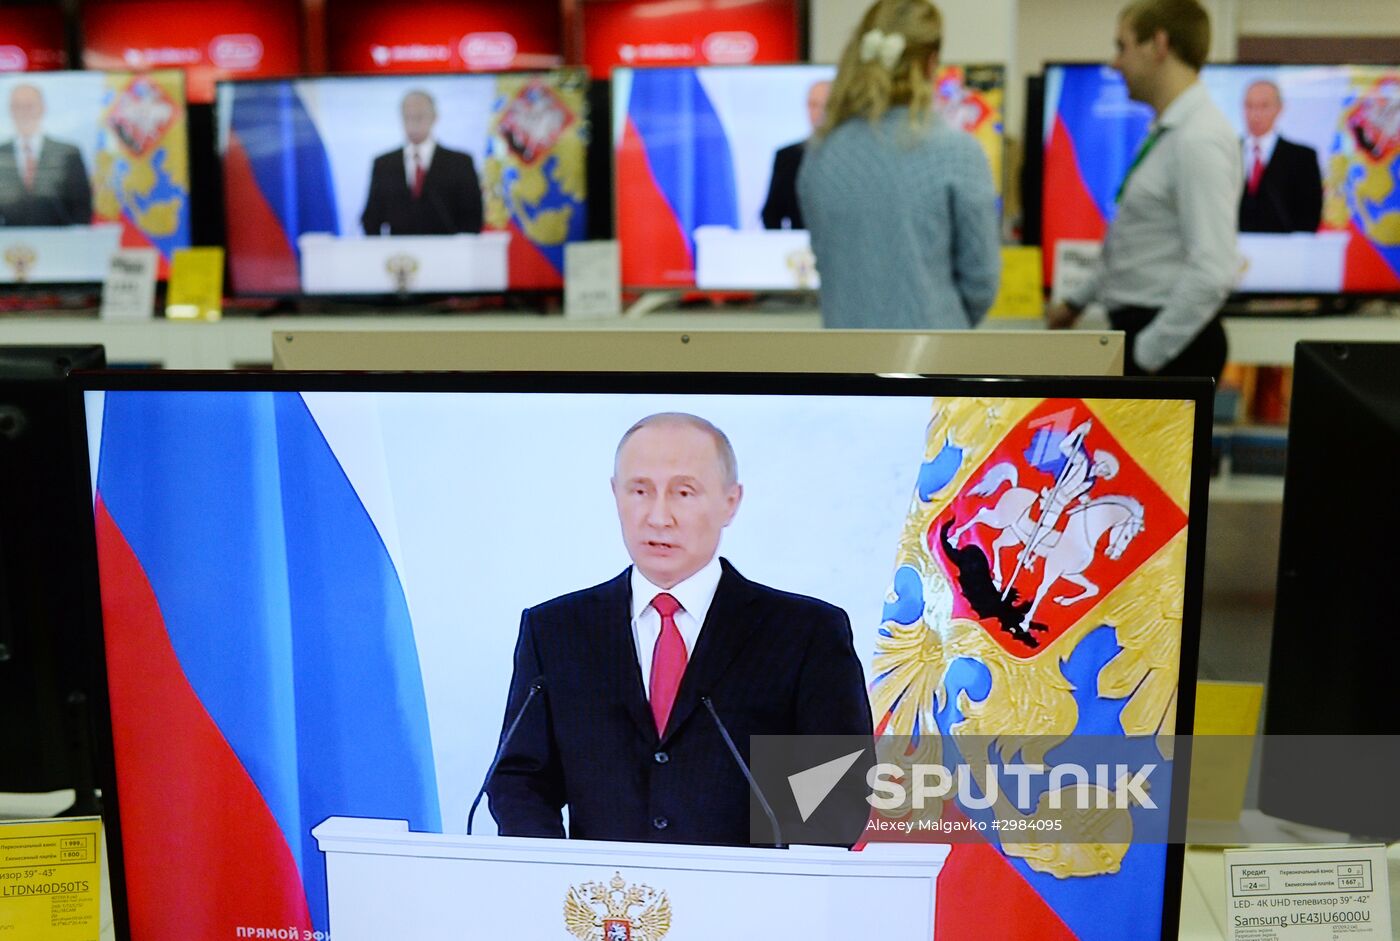 Live broadcast of Vladimir Putin's Annual Presidential Address to the Federal Assembly